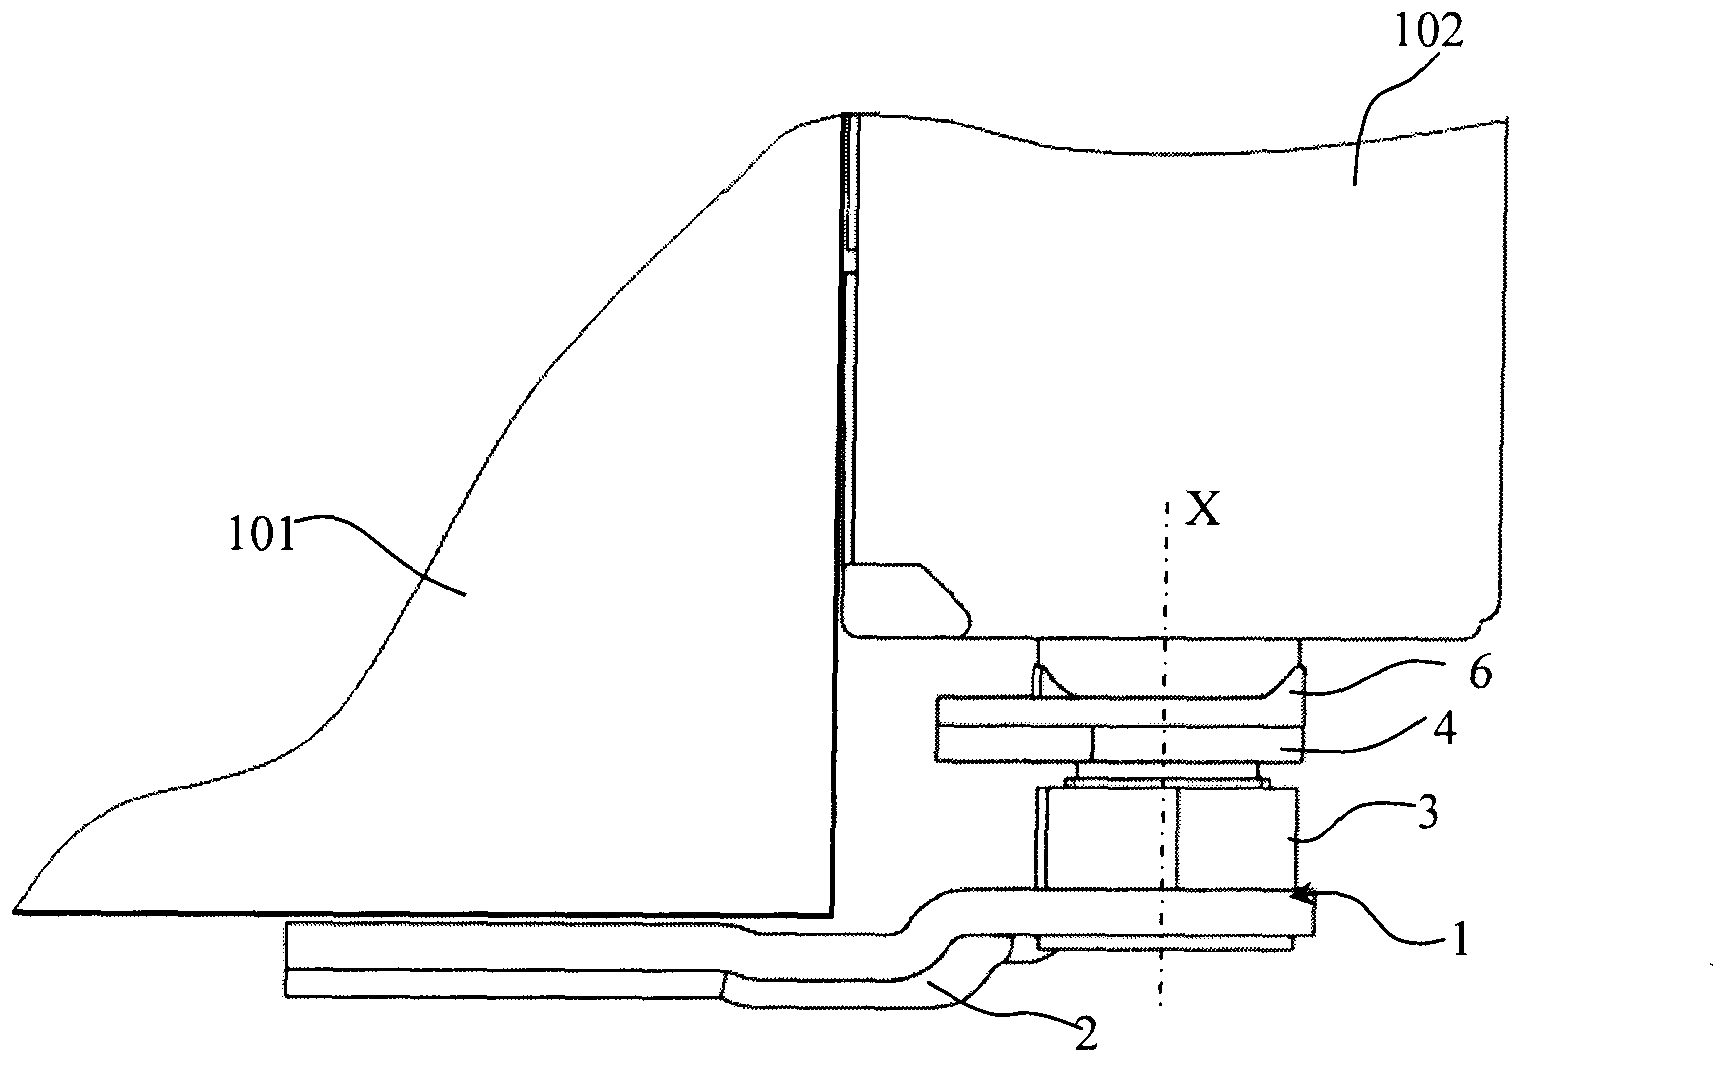 Refrigeration tool with door hinge assembly